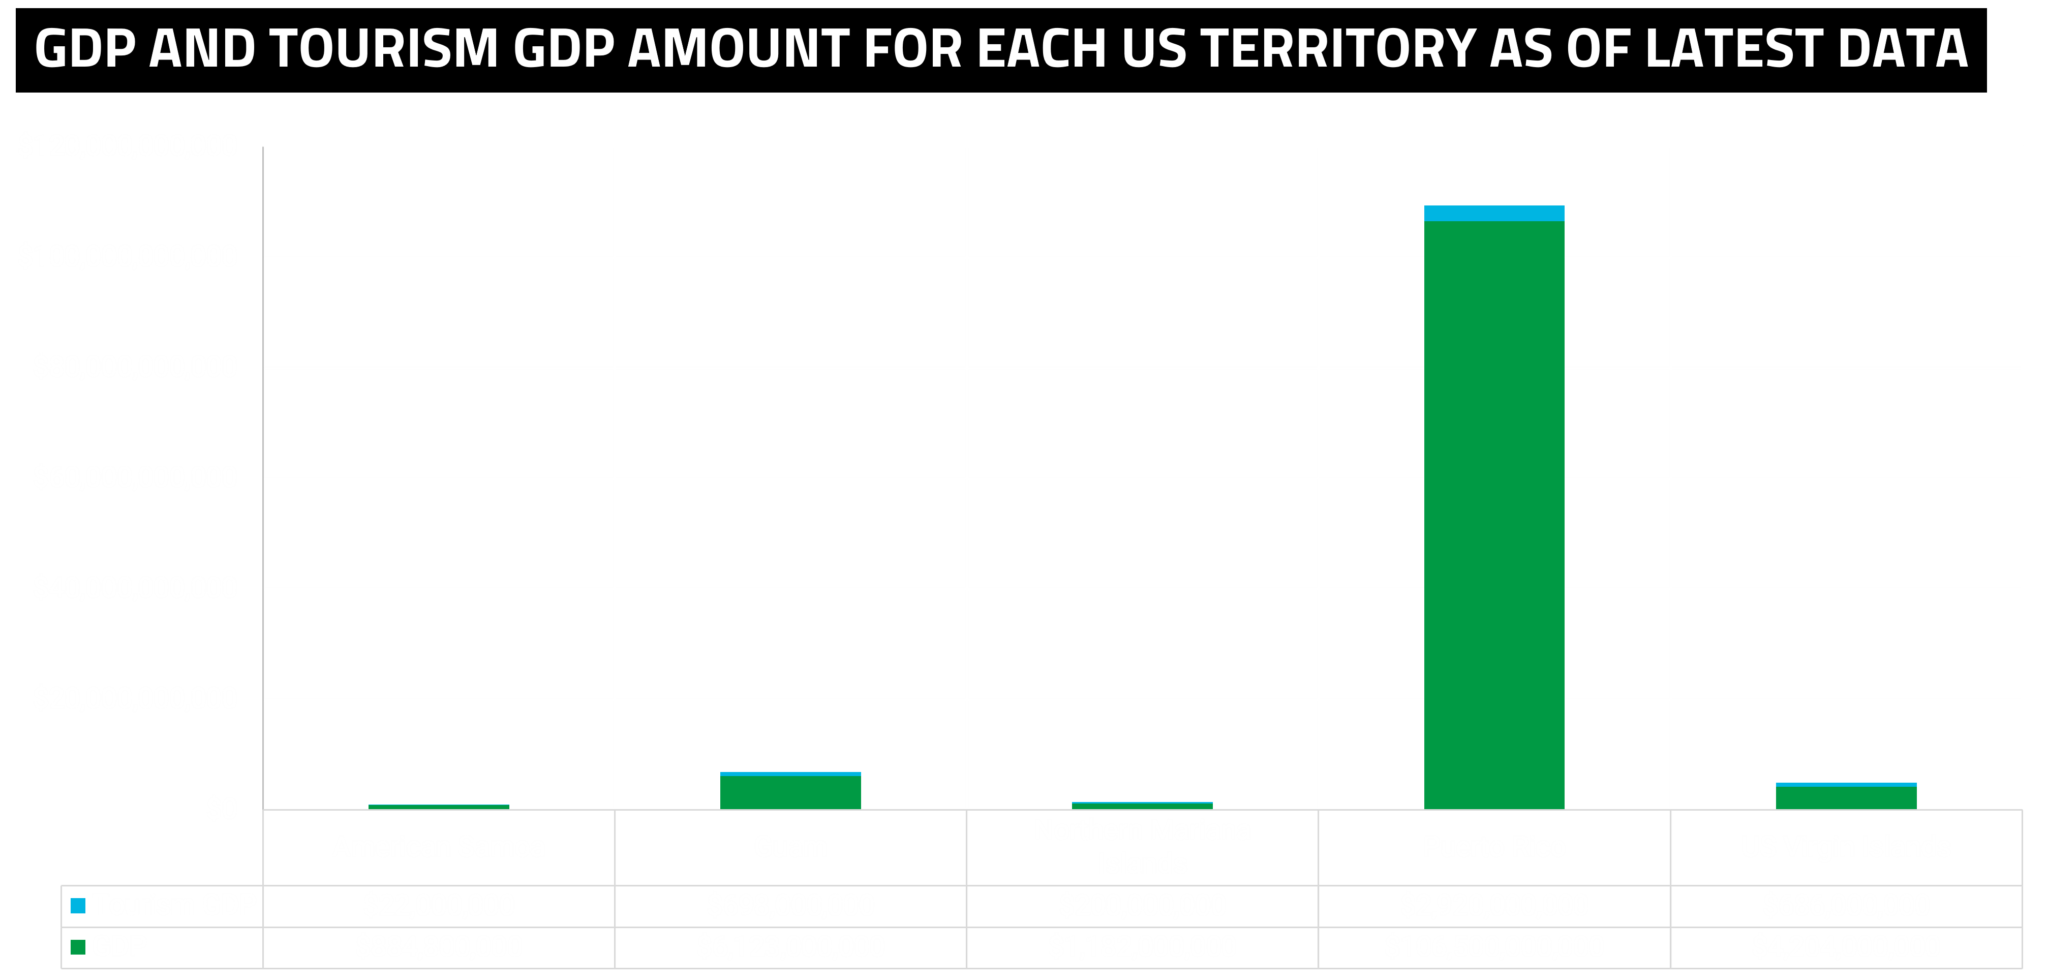 GDP and tourism GDP amount for each us territory as of latest data (Date from 2020 for Puerto Rico, Guam, and US Virgin Islands; 2019 for the Northern Mariana Islands; 2017 for American Samoa). Photo credit: Graph by Pasquines.